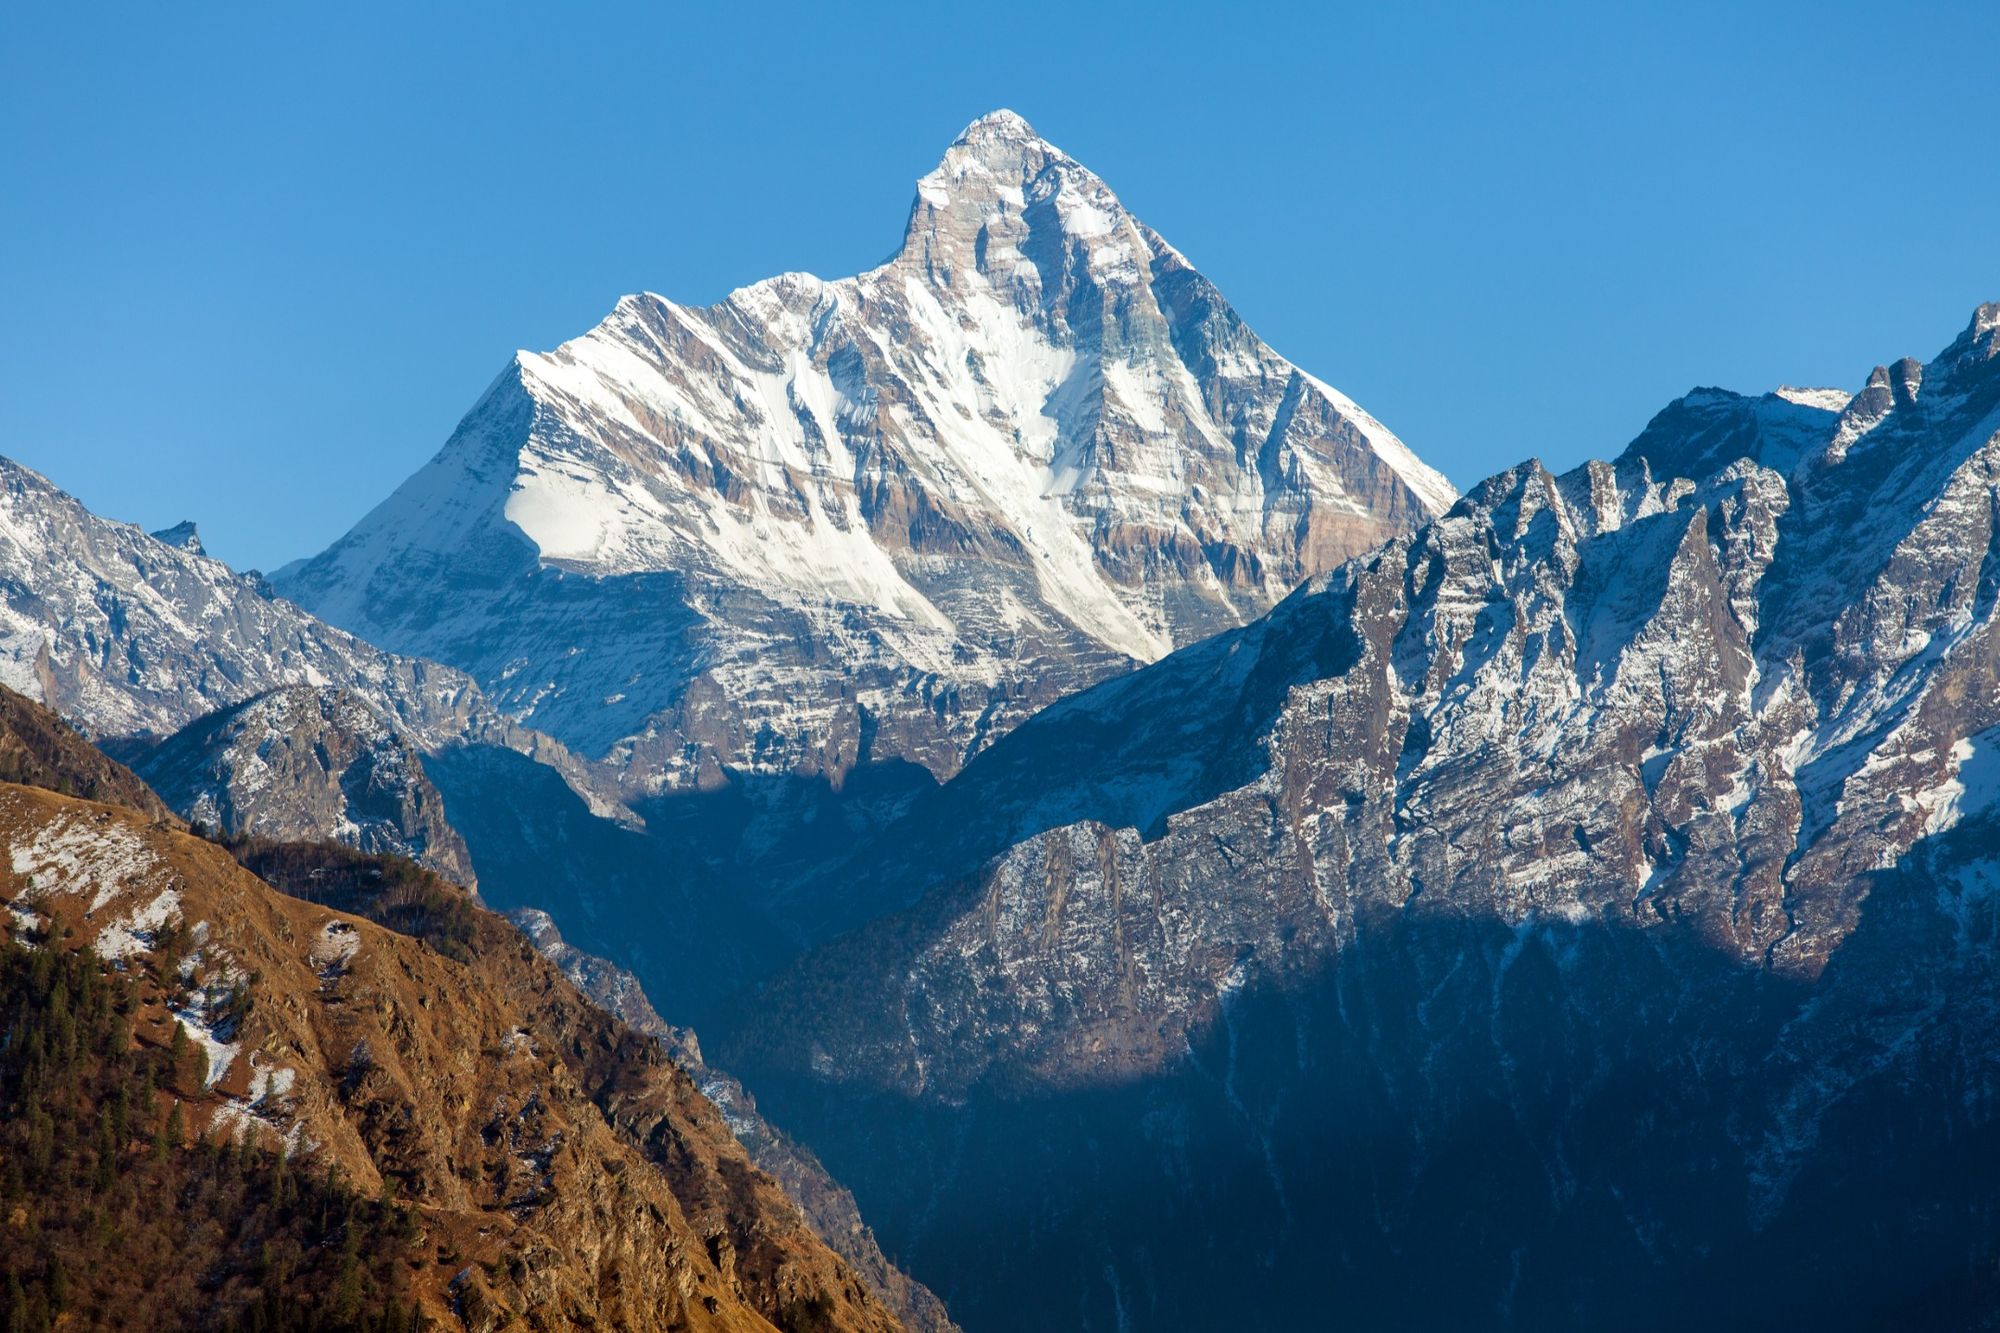 A view of Nanda Devi from the top of the Kuari Pass. Photo: Canva.